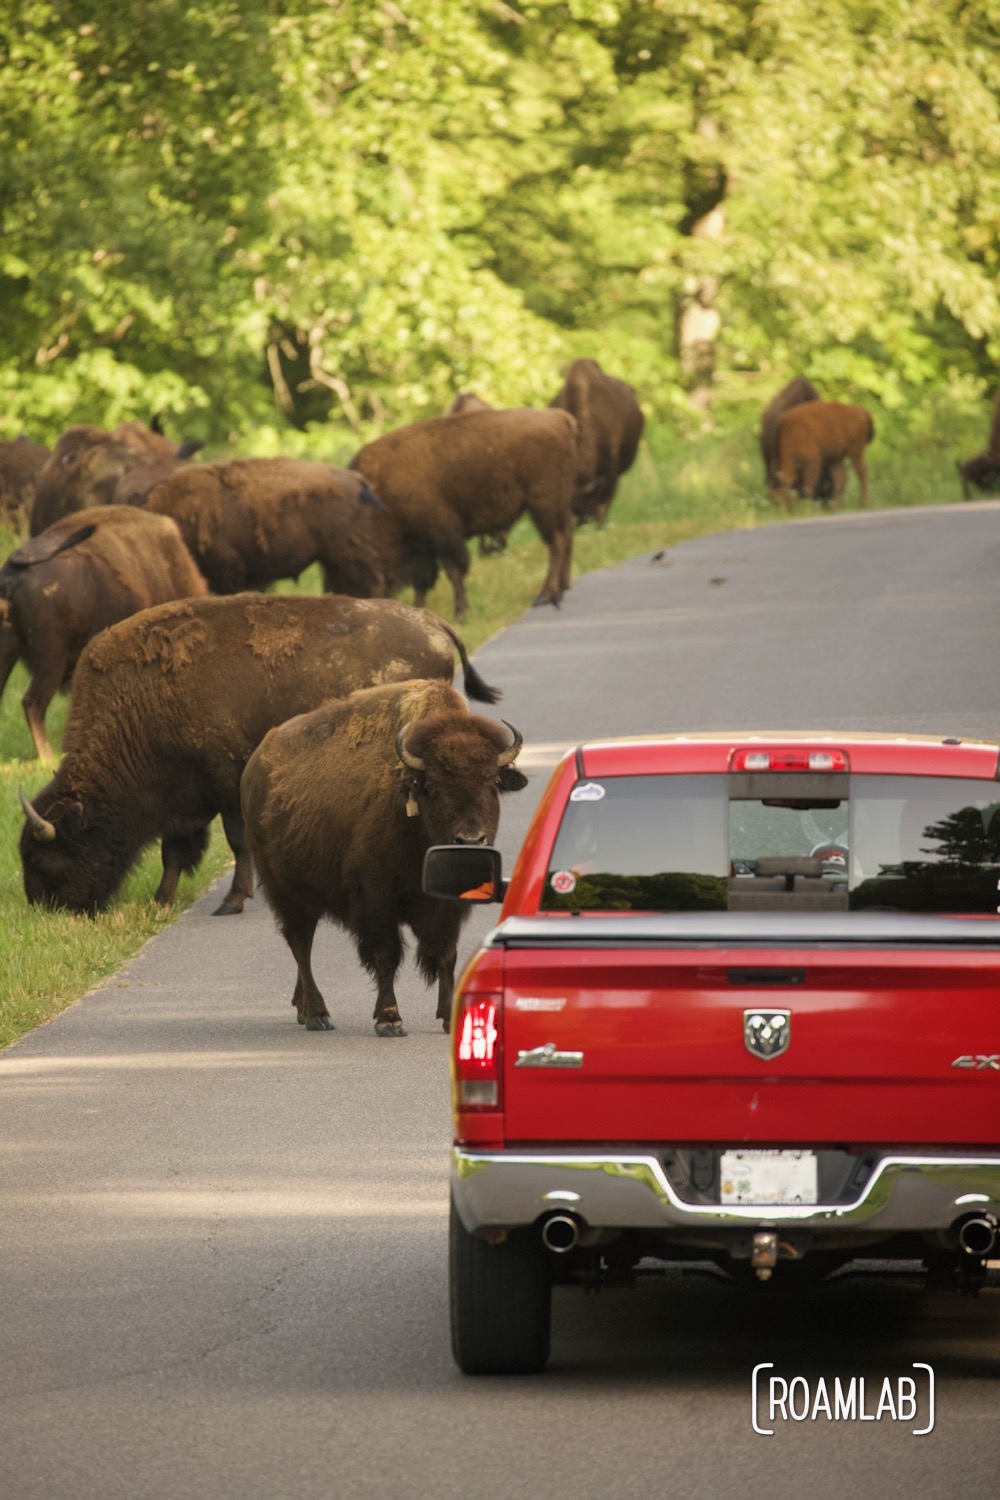 A red truck competes with bison to use the road.